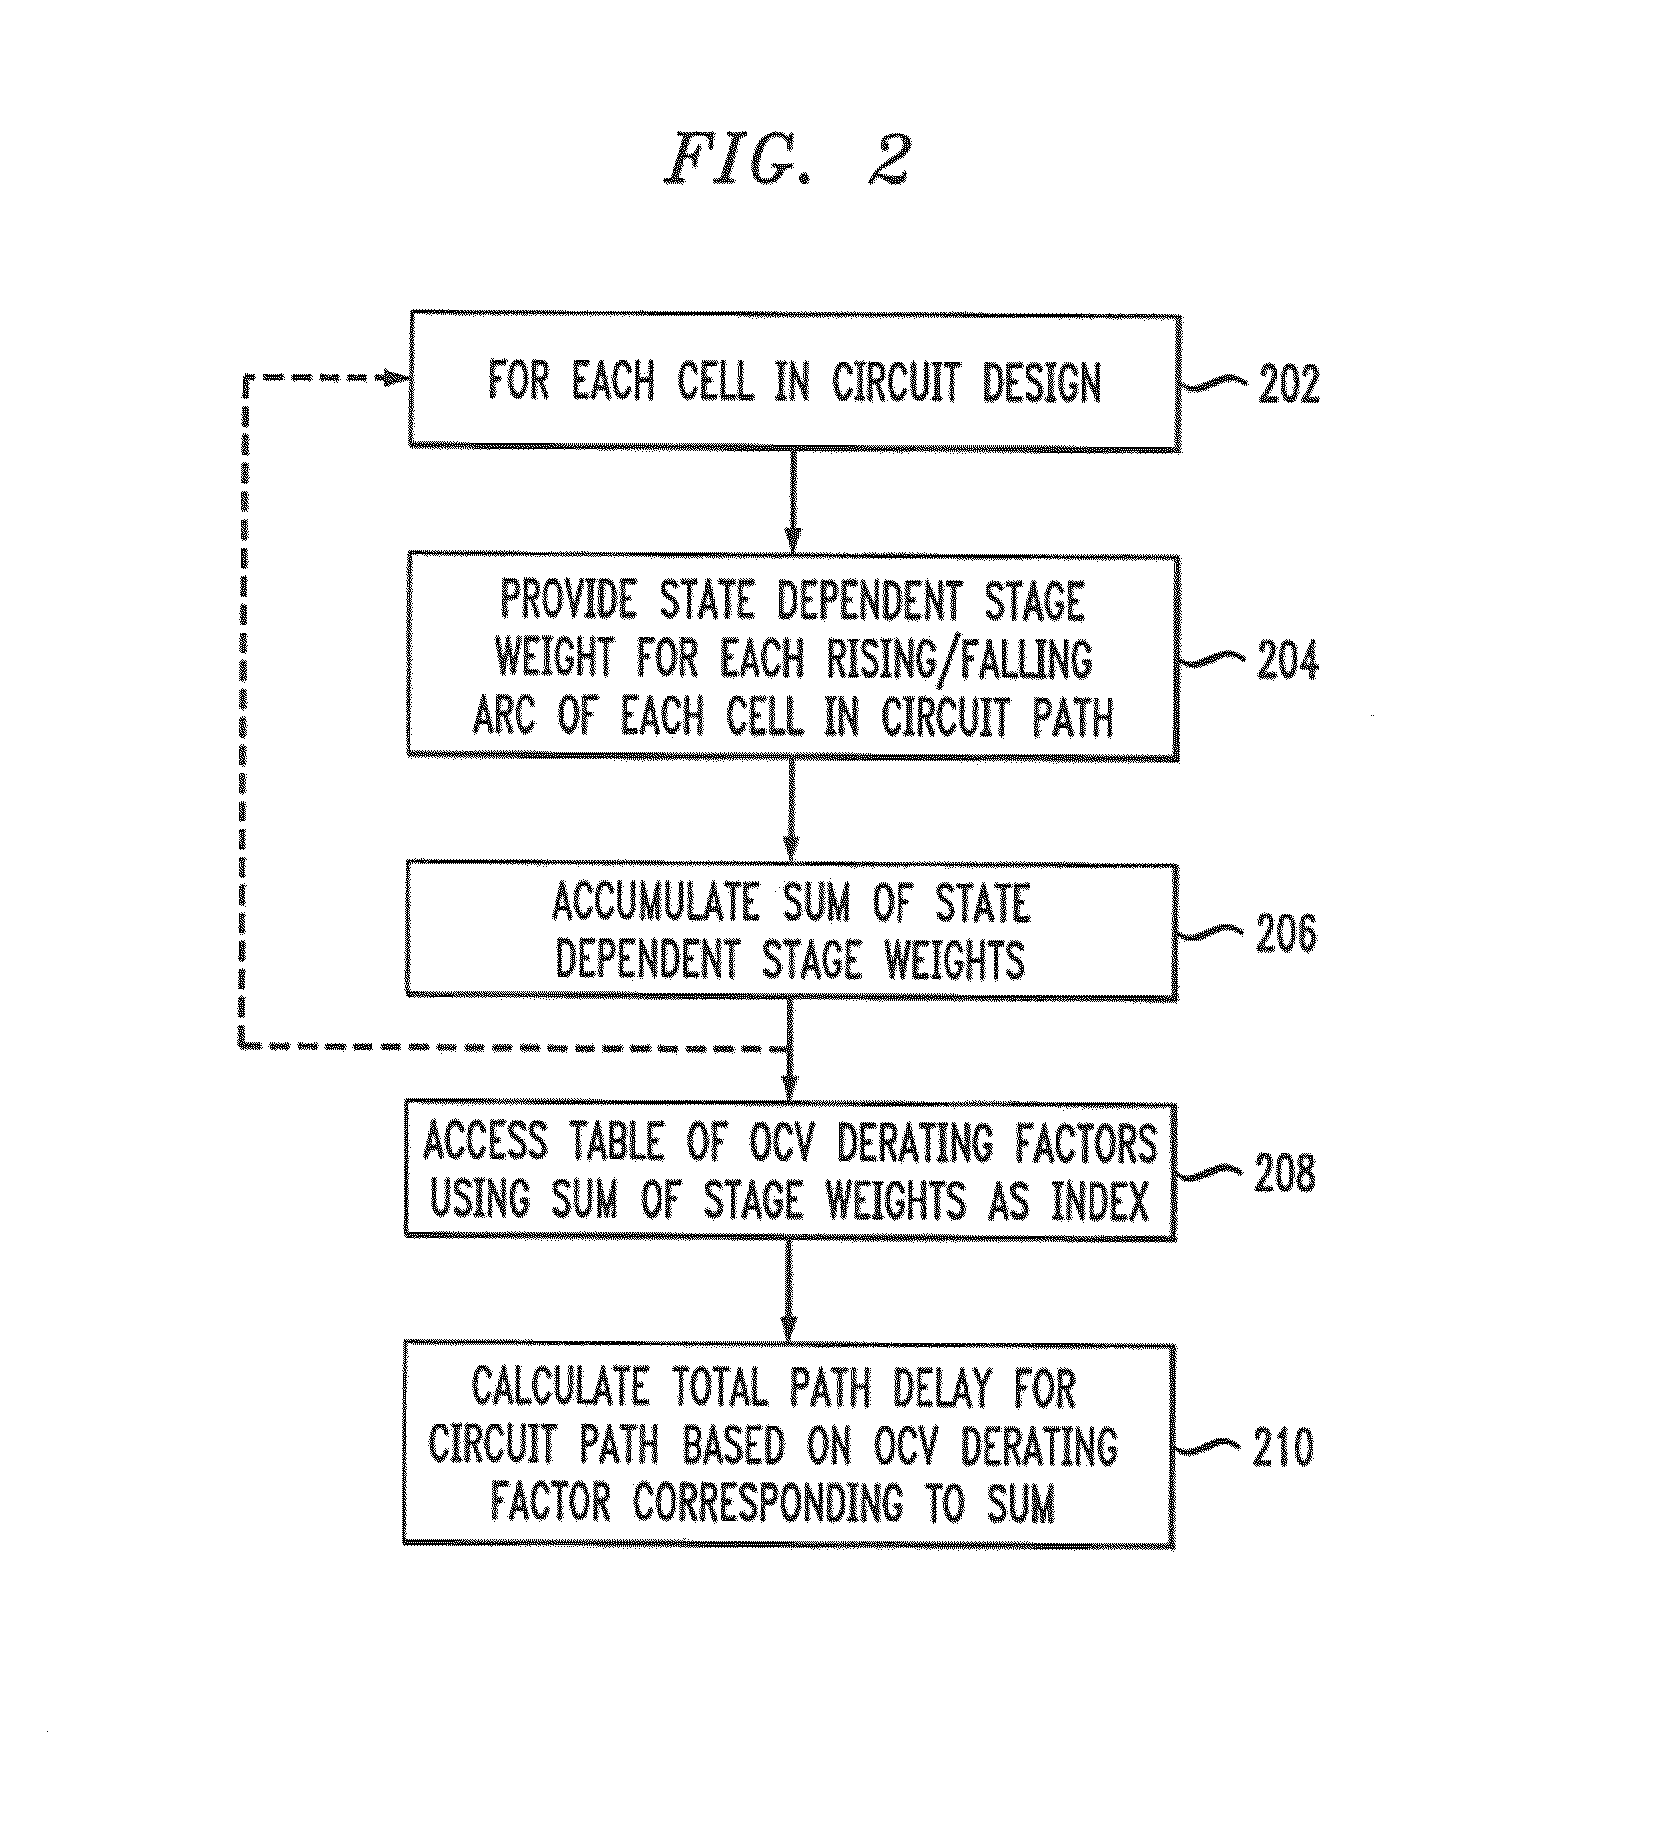 System and method for on-chip-variation analysis